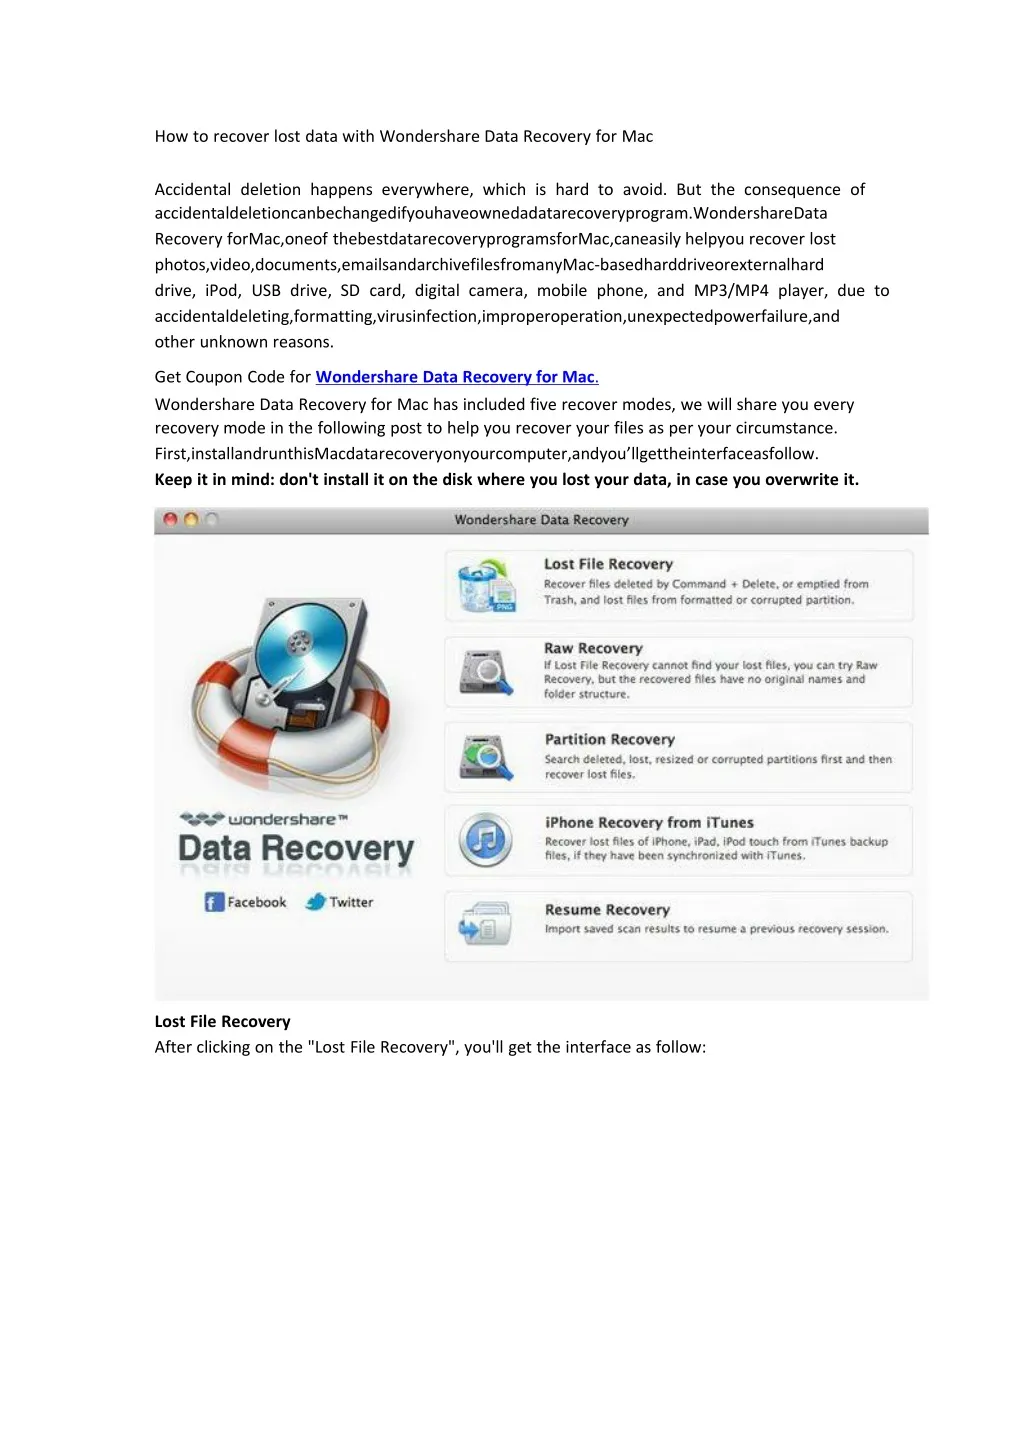 how to recover lost data with wondershare data